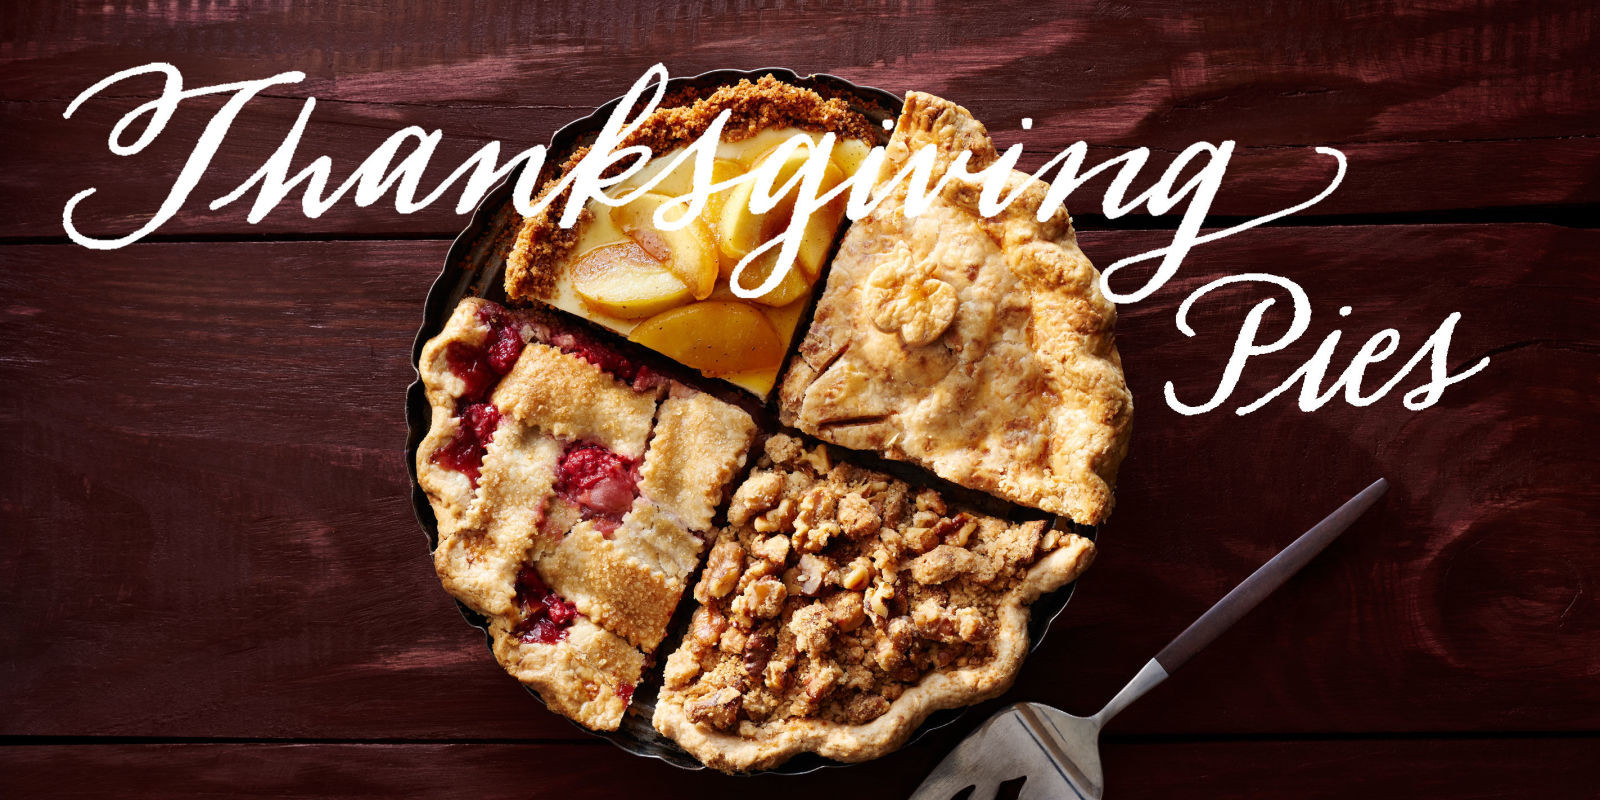 Best Pies For Thanksgiving
 38 Best Thanksgiving Pies Recipes and Ideas for